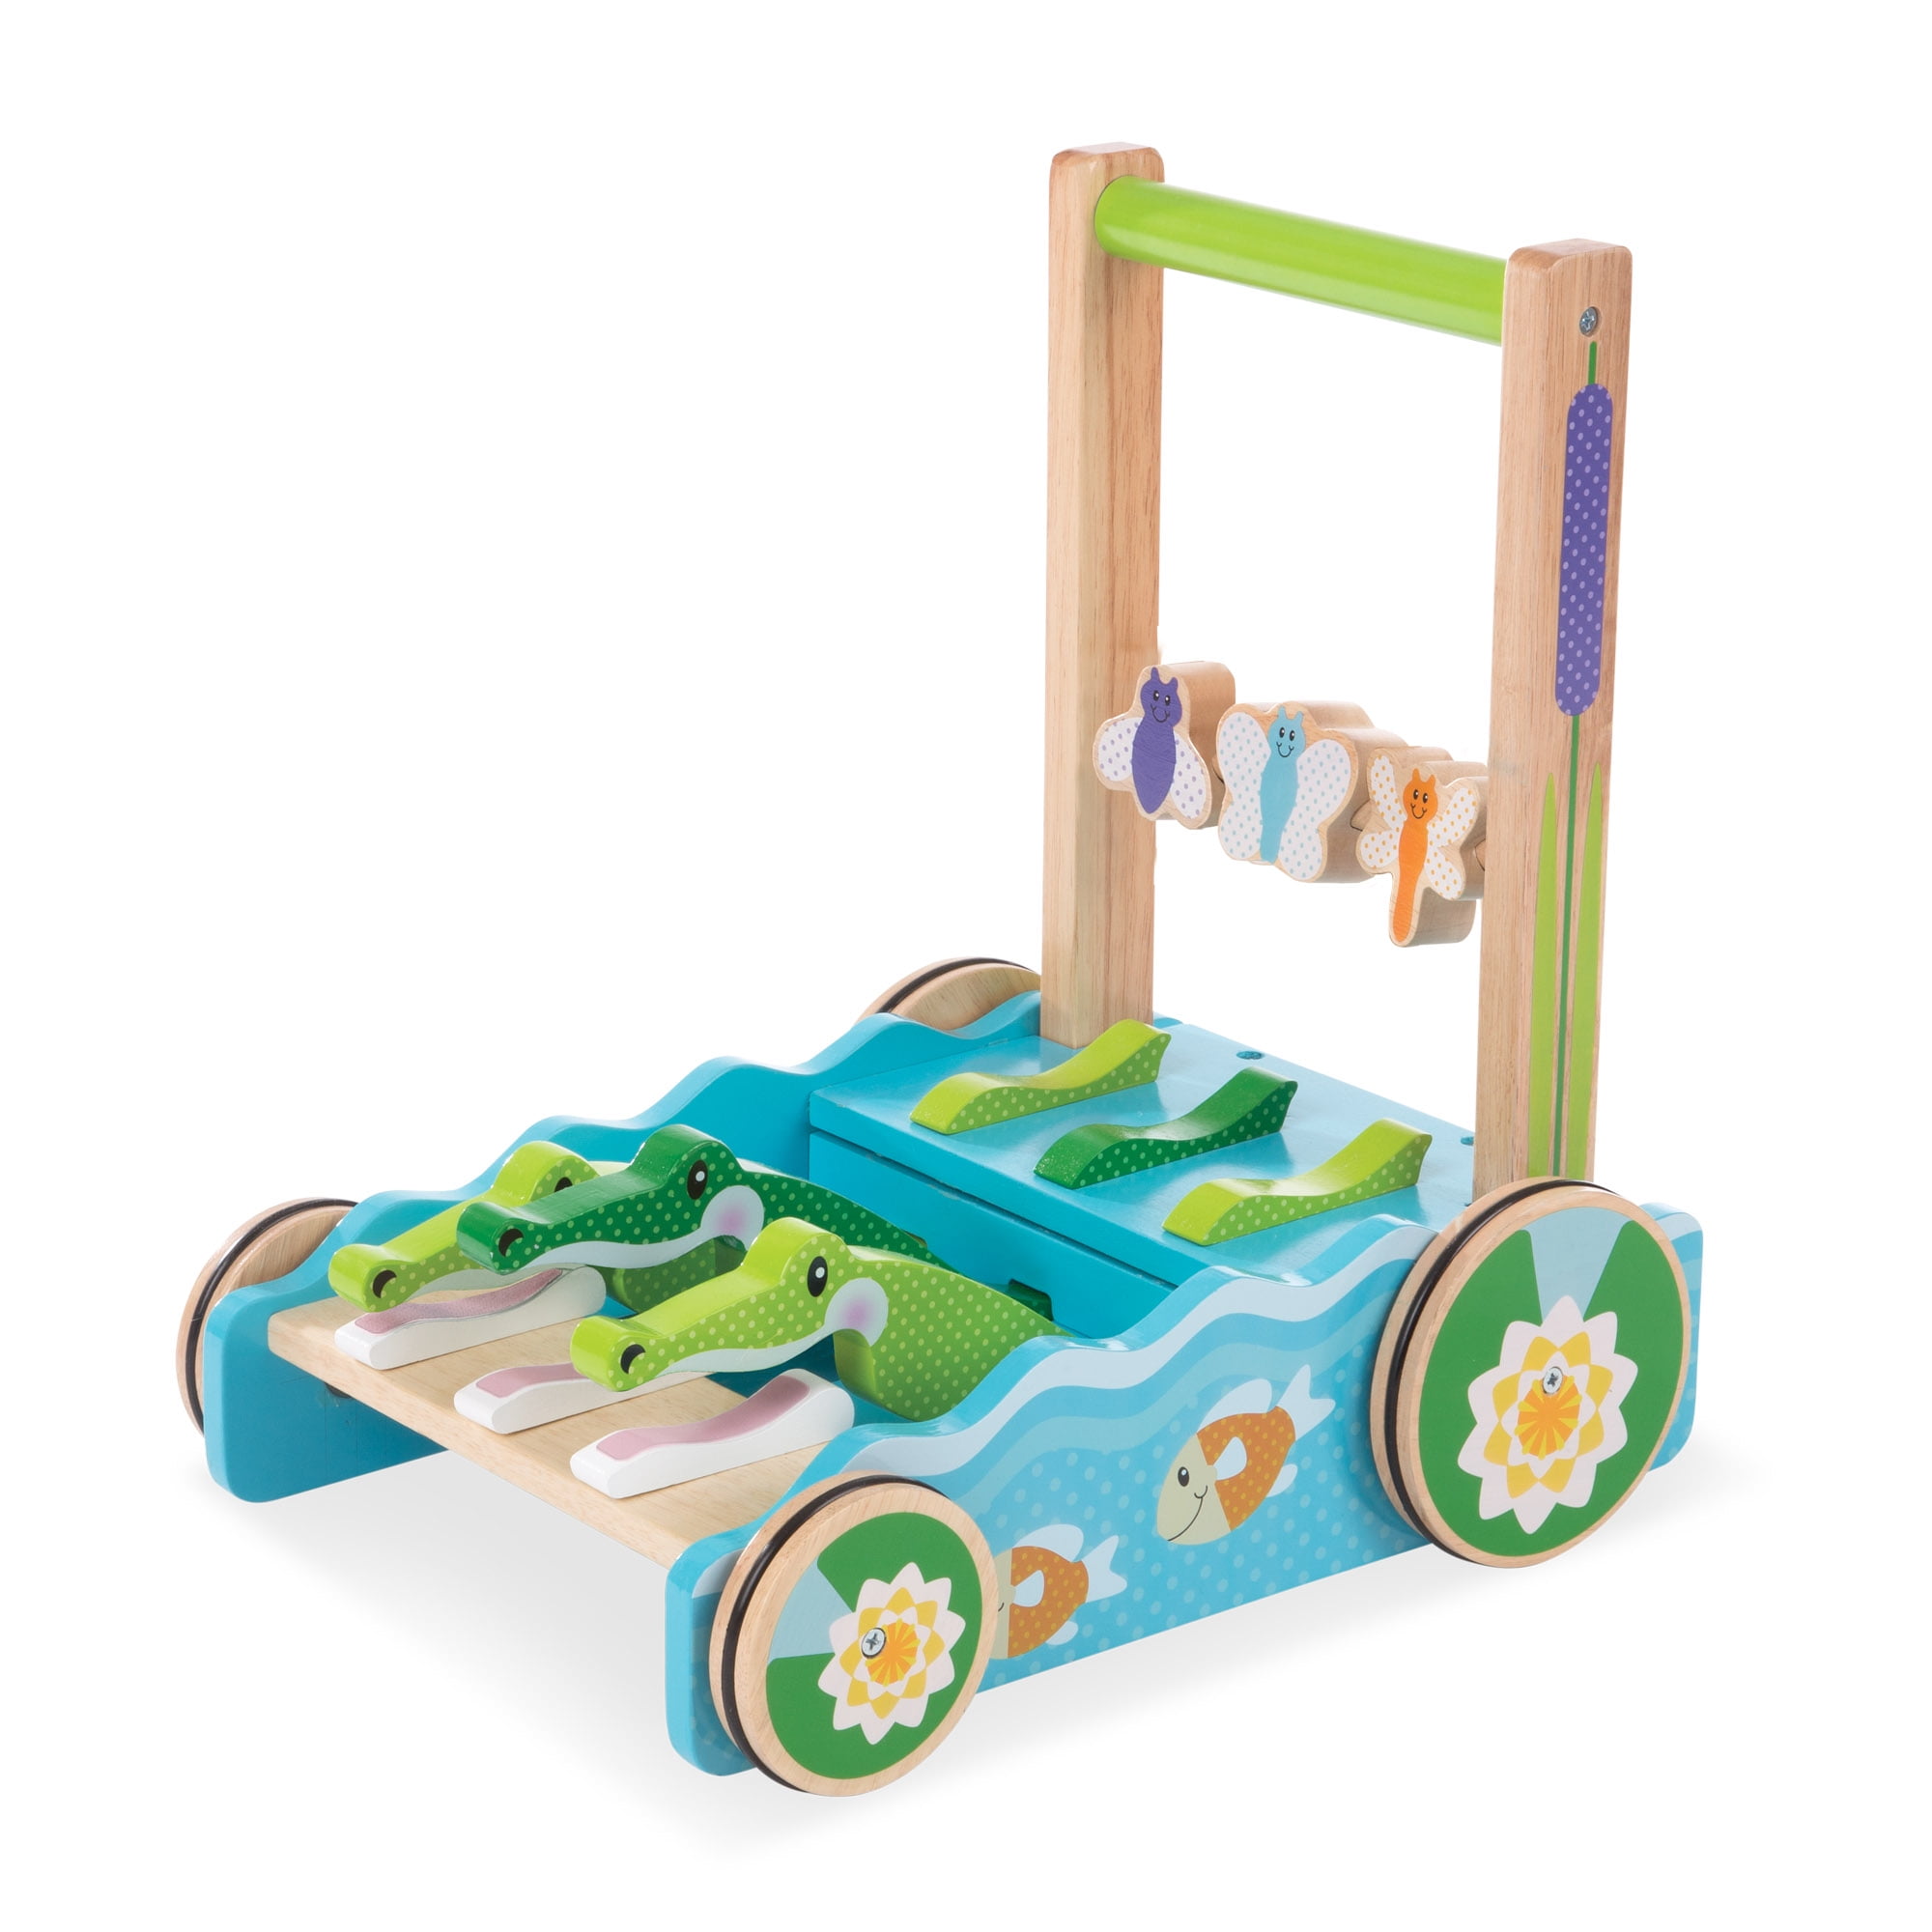 Push Toy Wooden Walker Melissa and Doug Chomp & Clack Learn to Walk 